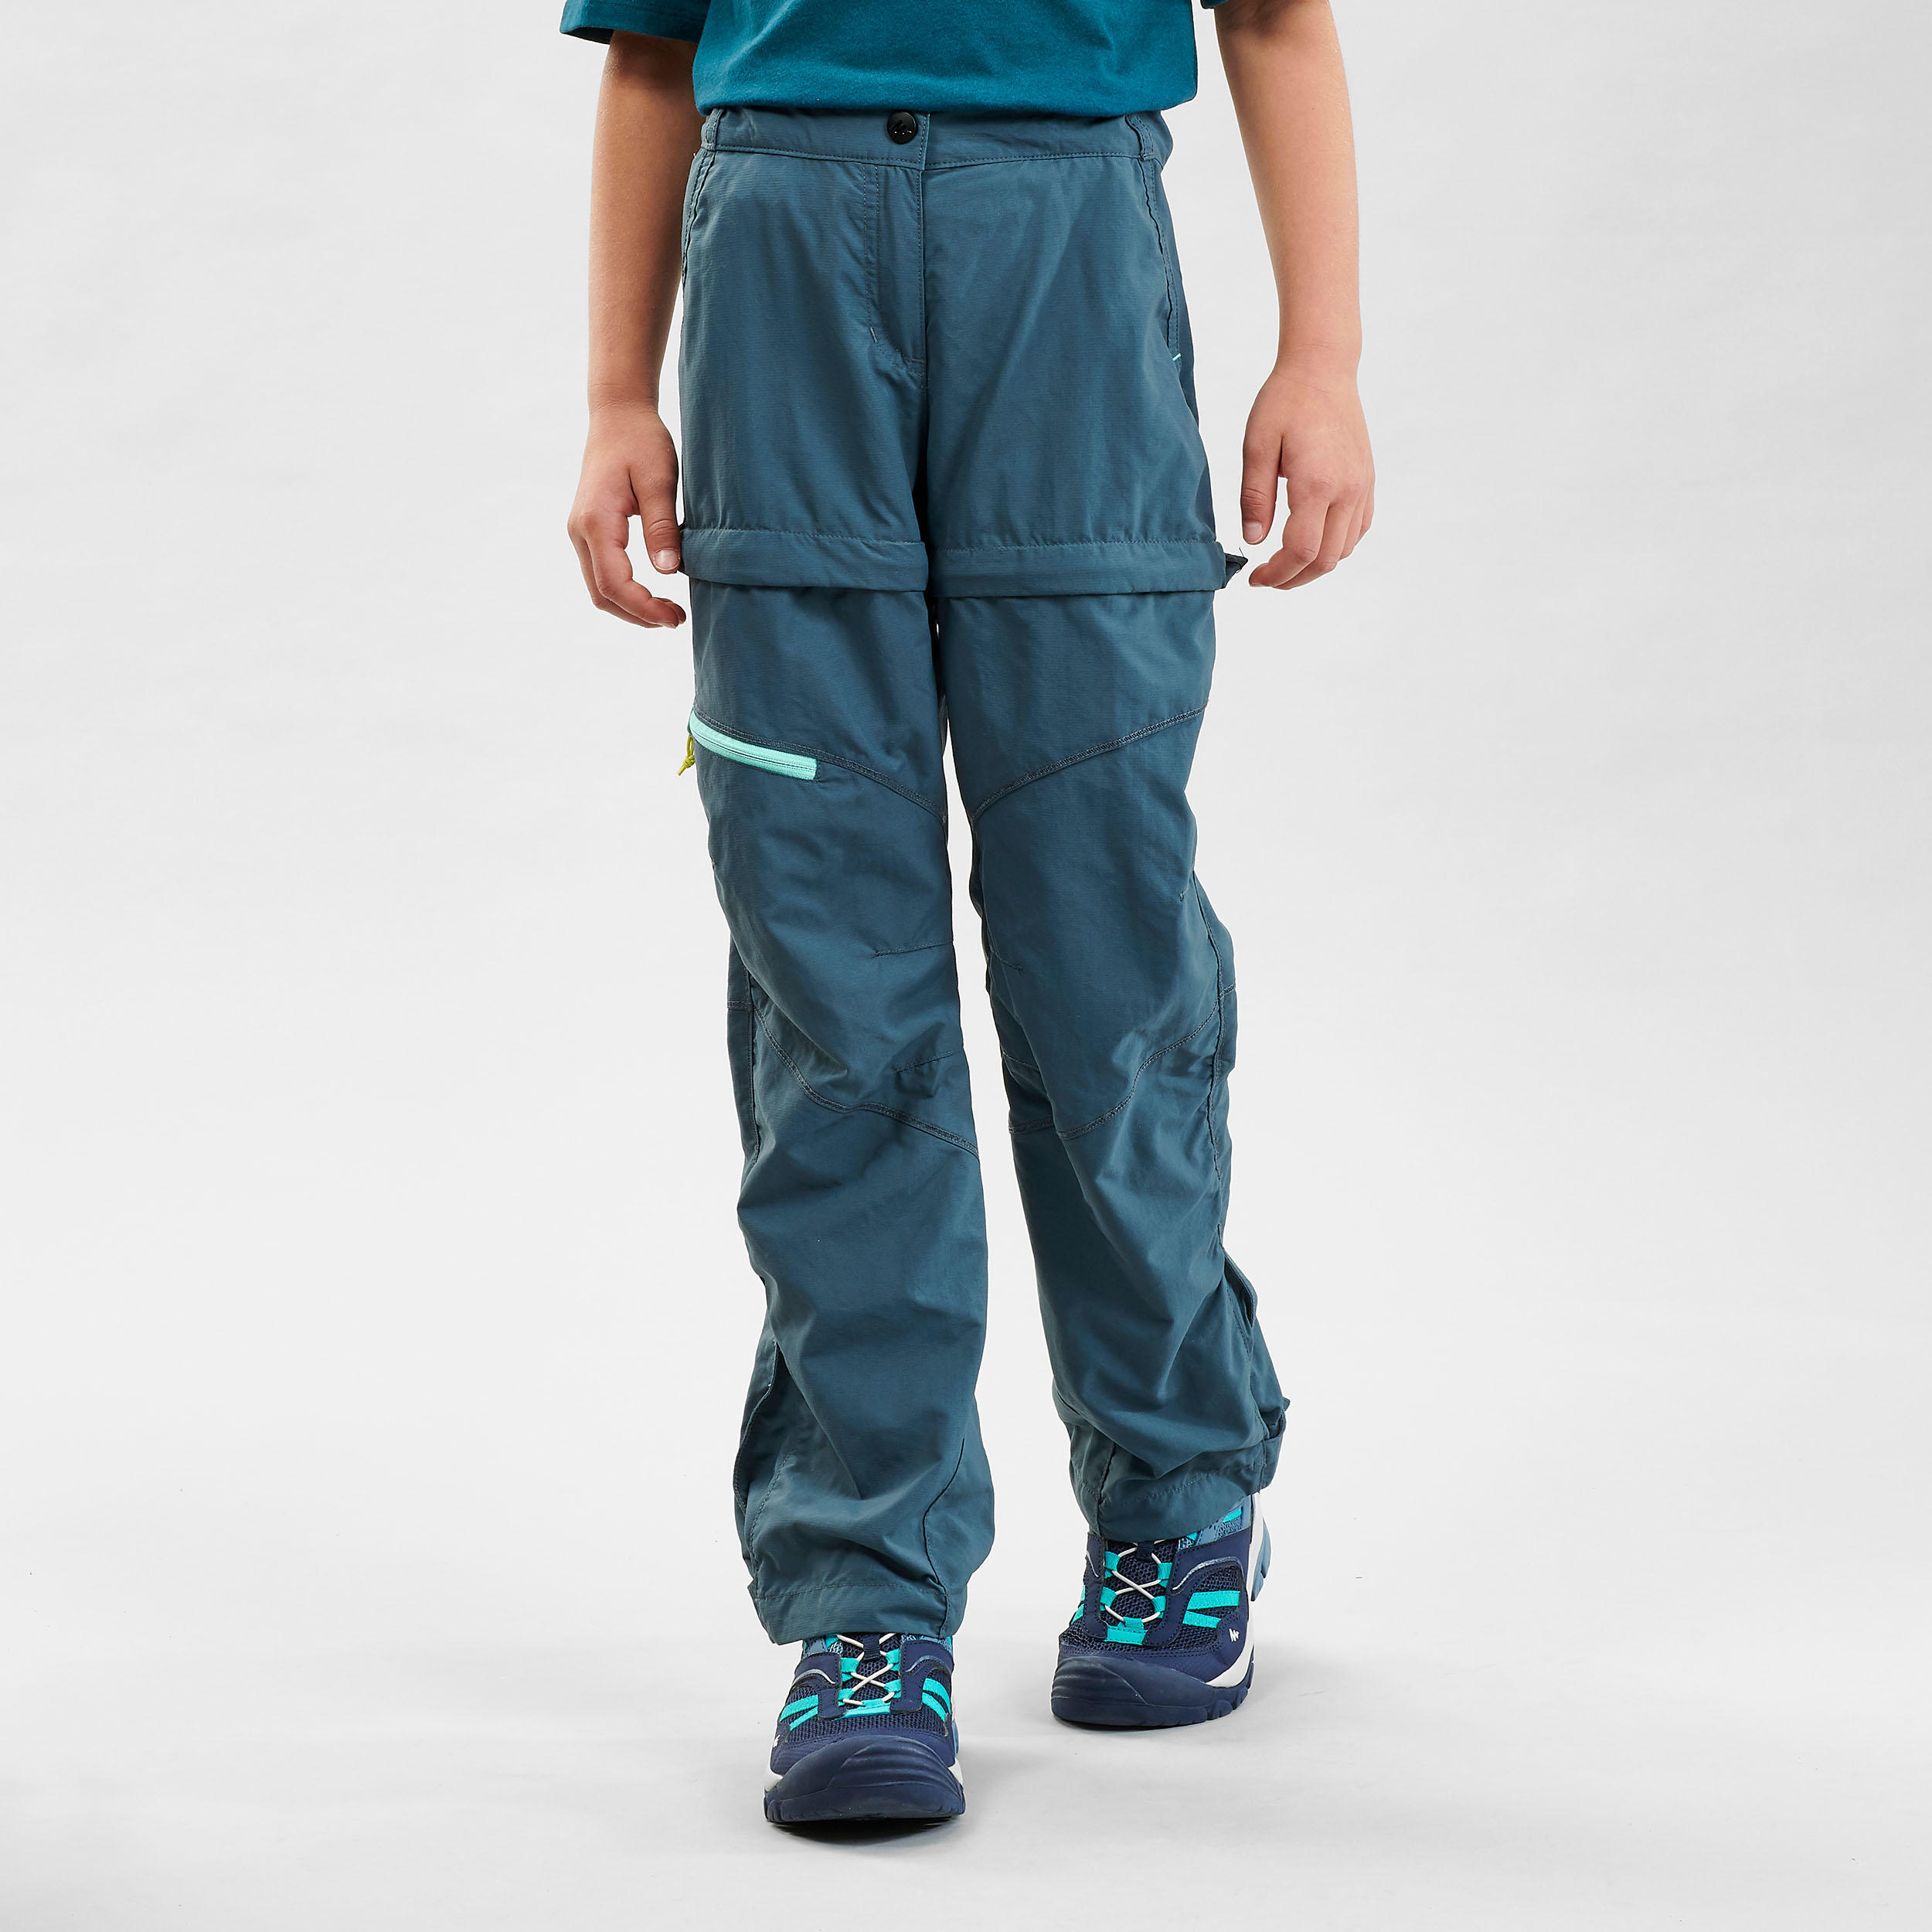 Kids’ Modular Hiking Trousers MH500 KID Aged 7-15 Turquoise 3/10